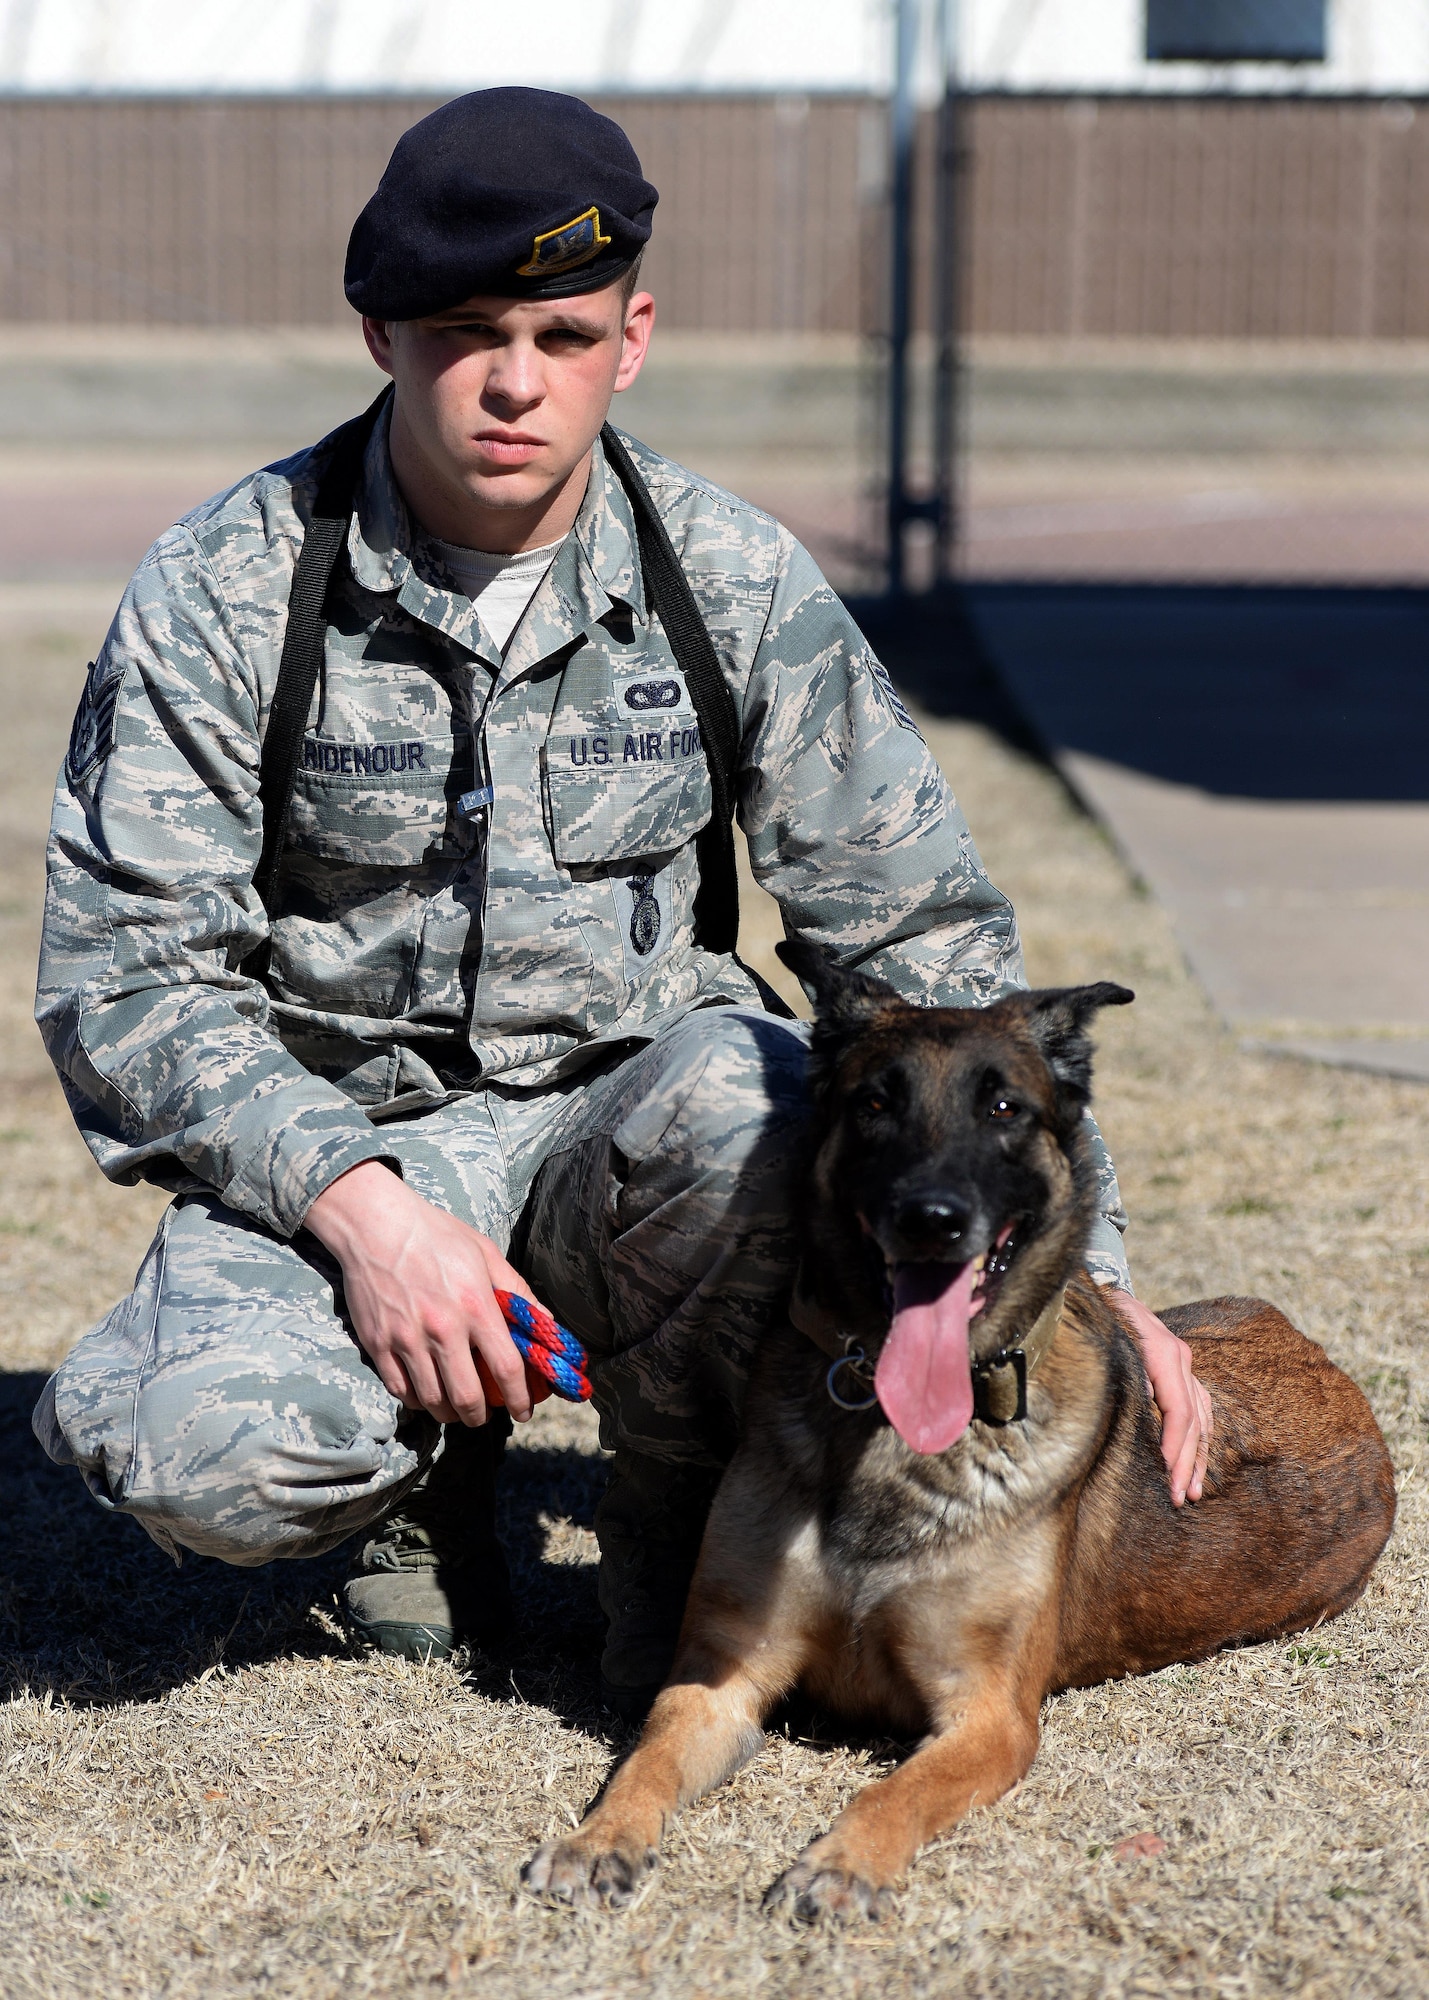 U.S. Air Force Staff Sgt. Justin Ridenour, 97th Security Forces Squadron military working dog handler, kneels with his working dog, Yyoda, at Altus Air Force Base, Oklahoma, Feb. 10, 2015. Ridenour has been a military working dog handler for four years, and he and Yyoda have been partners since he arrived in Altus in March 2014. (U.S. Air Force photo by Airman 1st Class Megan E. Acs)